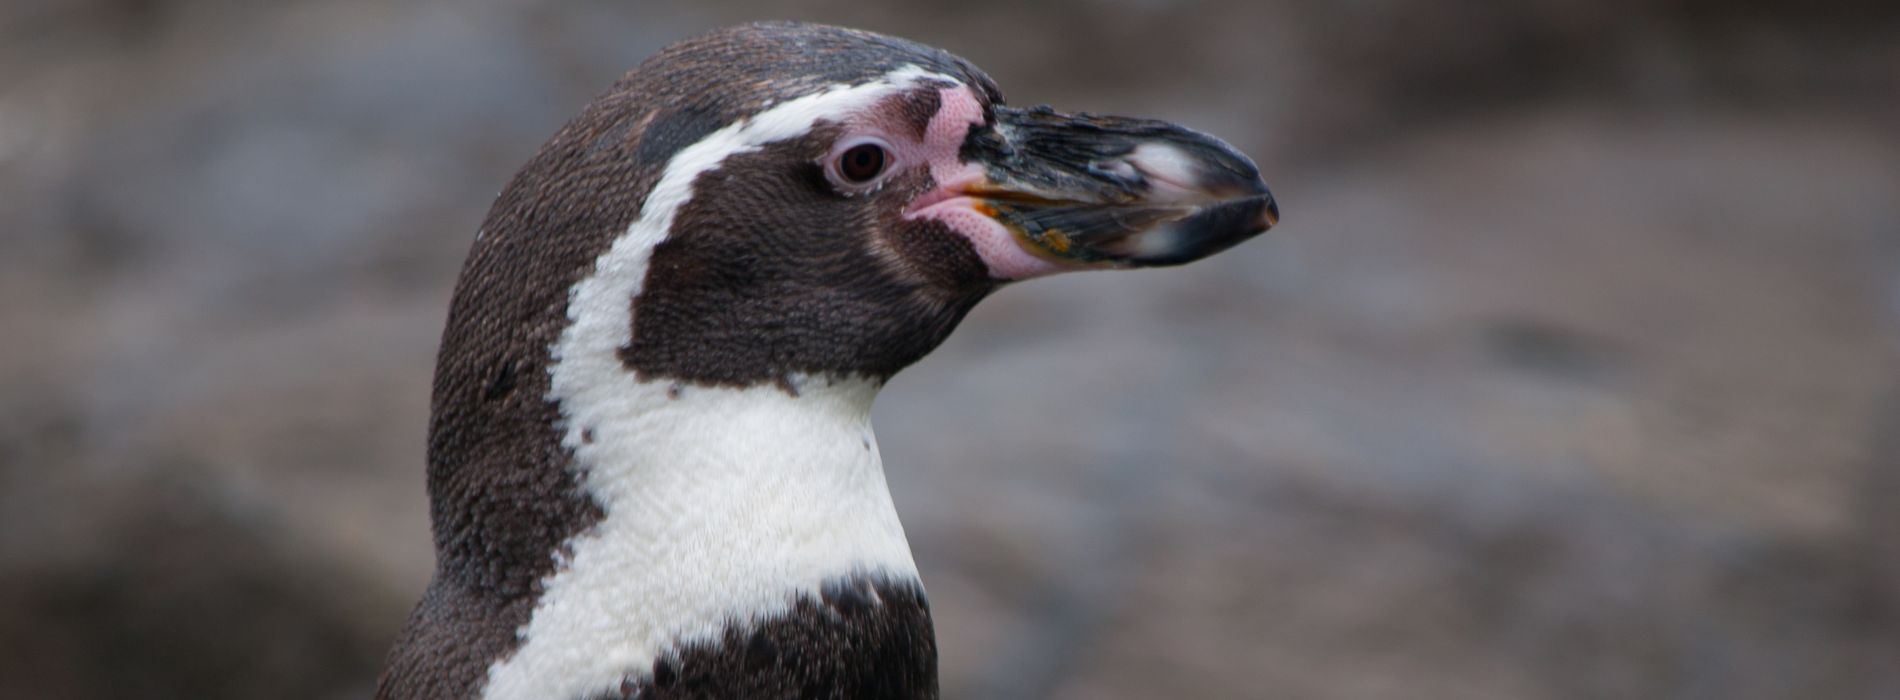 Humboldt Penguin Biography: A Playful Journey into the Life of the Curious Bird